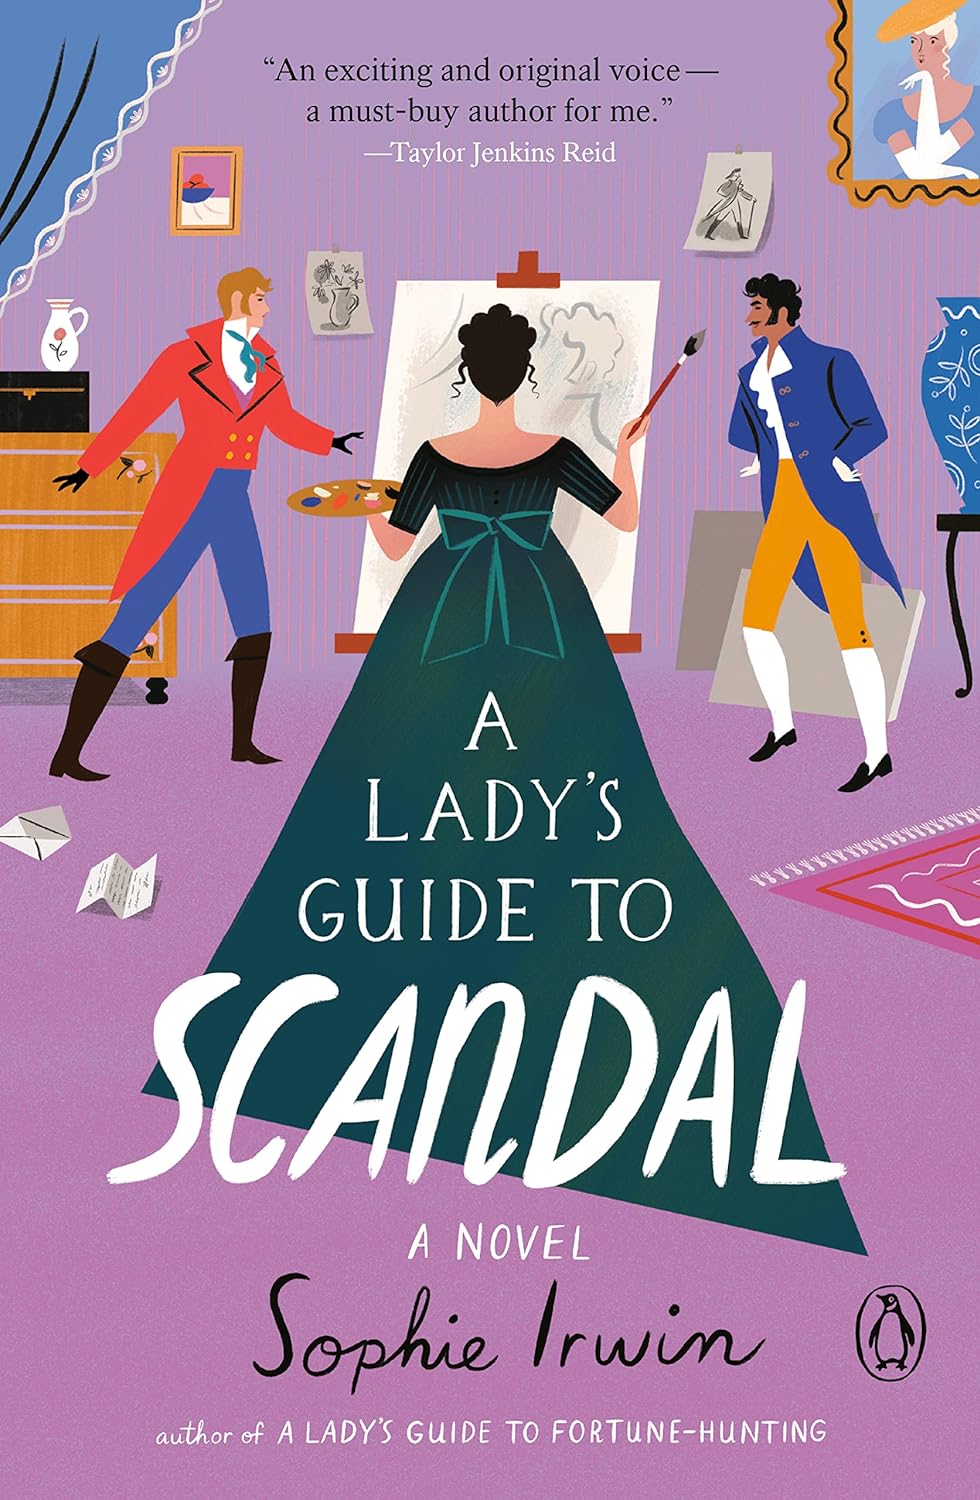 A Lady’s Guide to Scandal